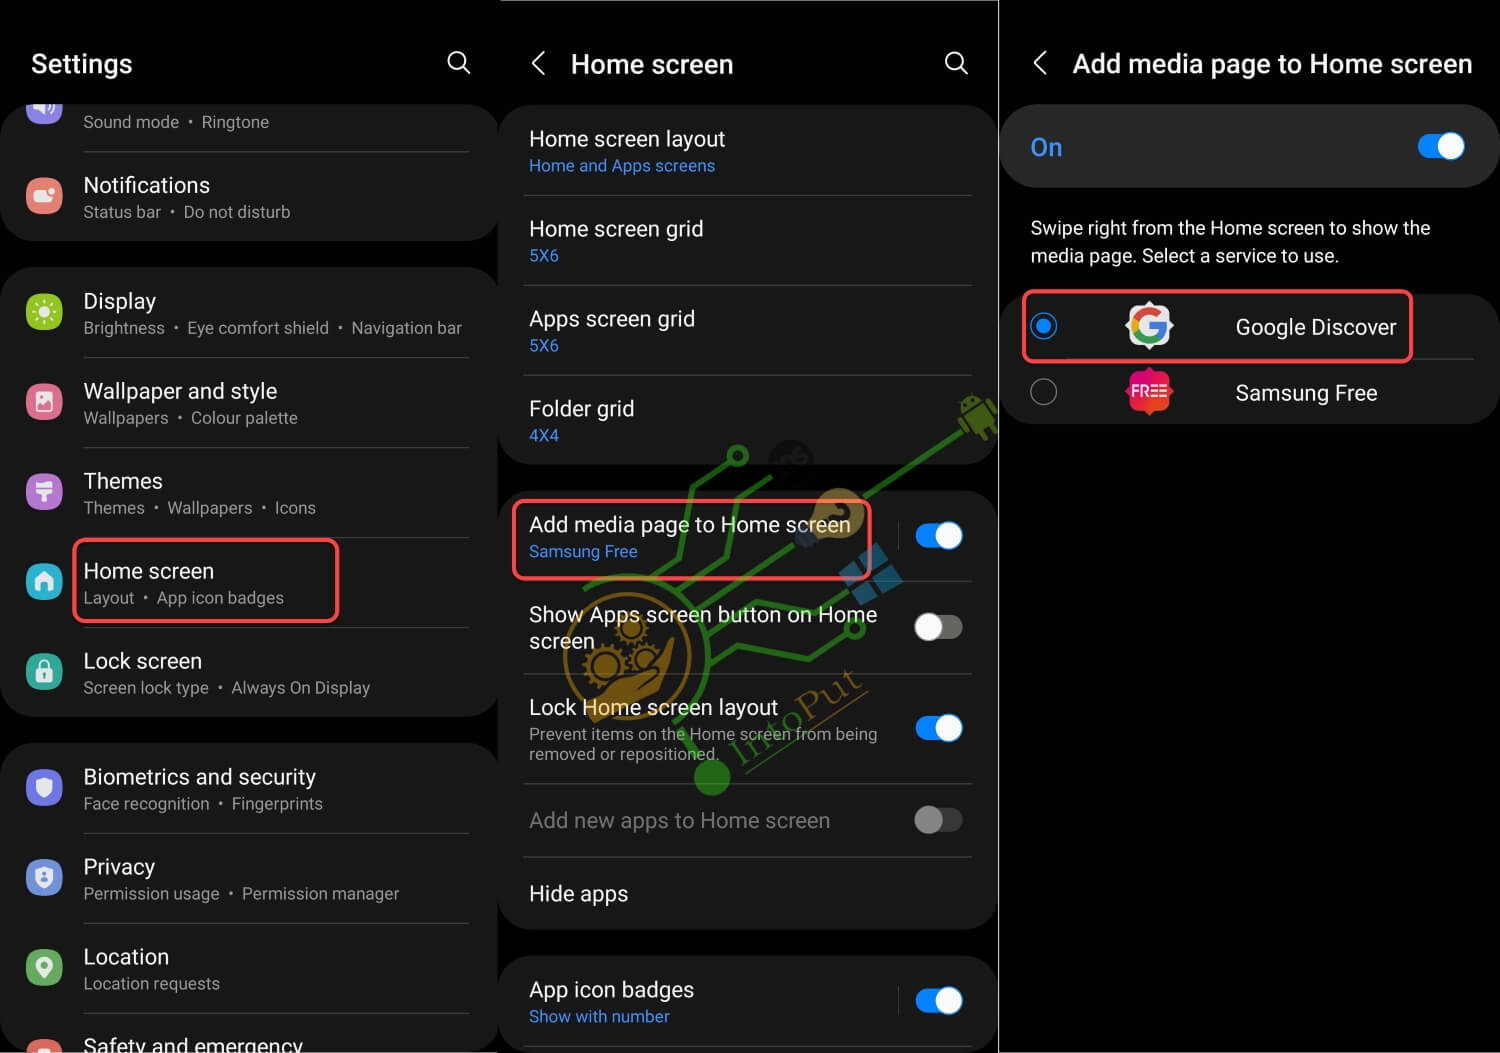 How to Replace Samsung free with Google feed on Samsung home screen